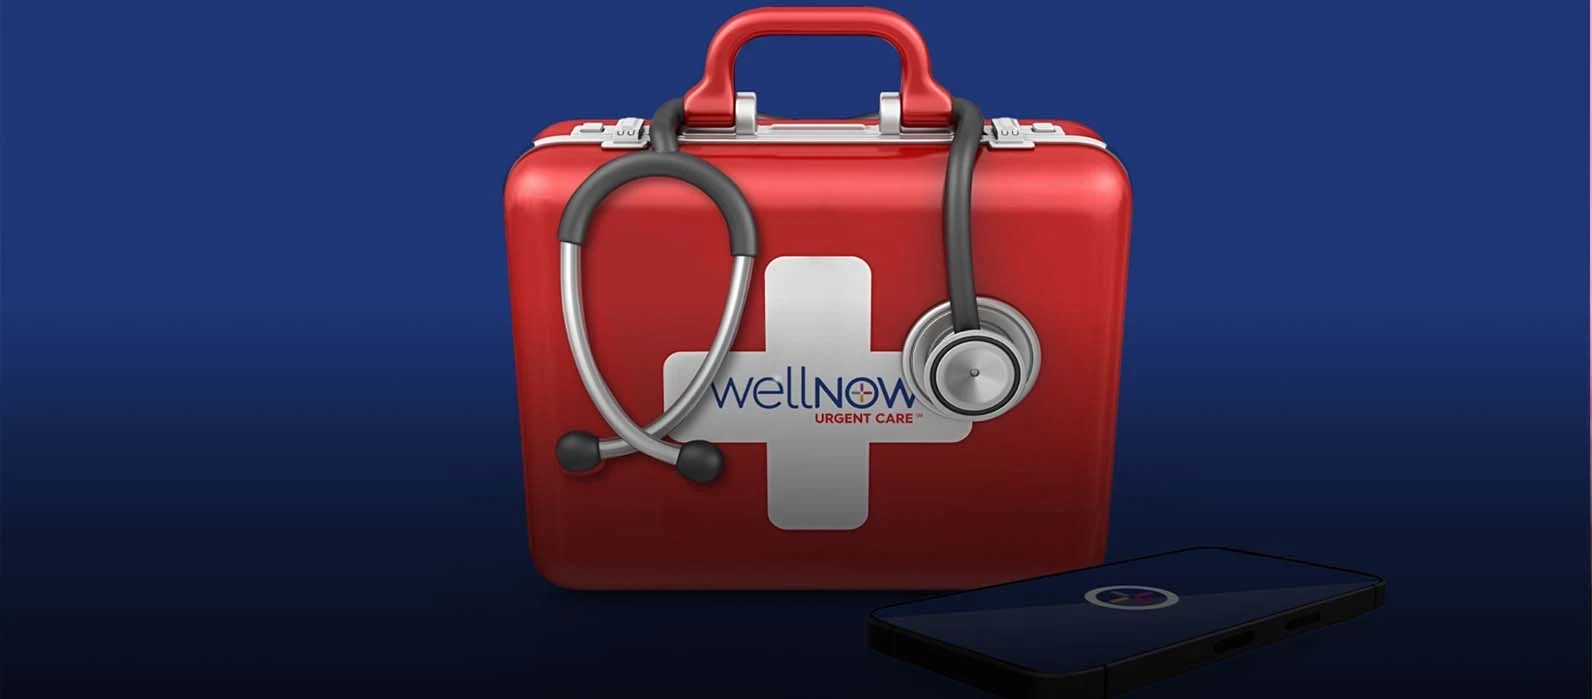 A smart phone, a stethoscope, and a red first aid kit emblazoned with the WellNow Urgent Care logo, are arranged against a blue background.